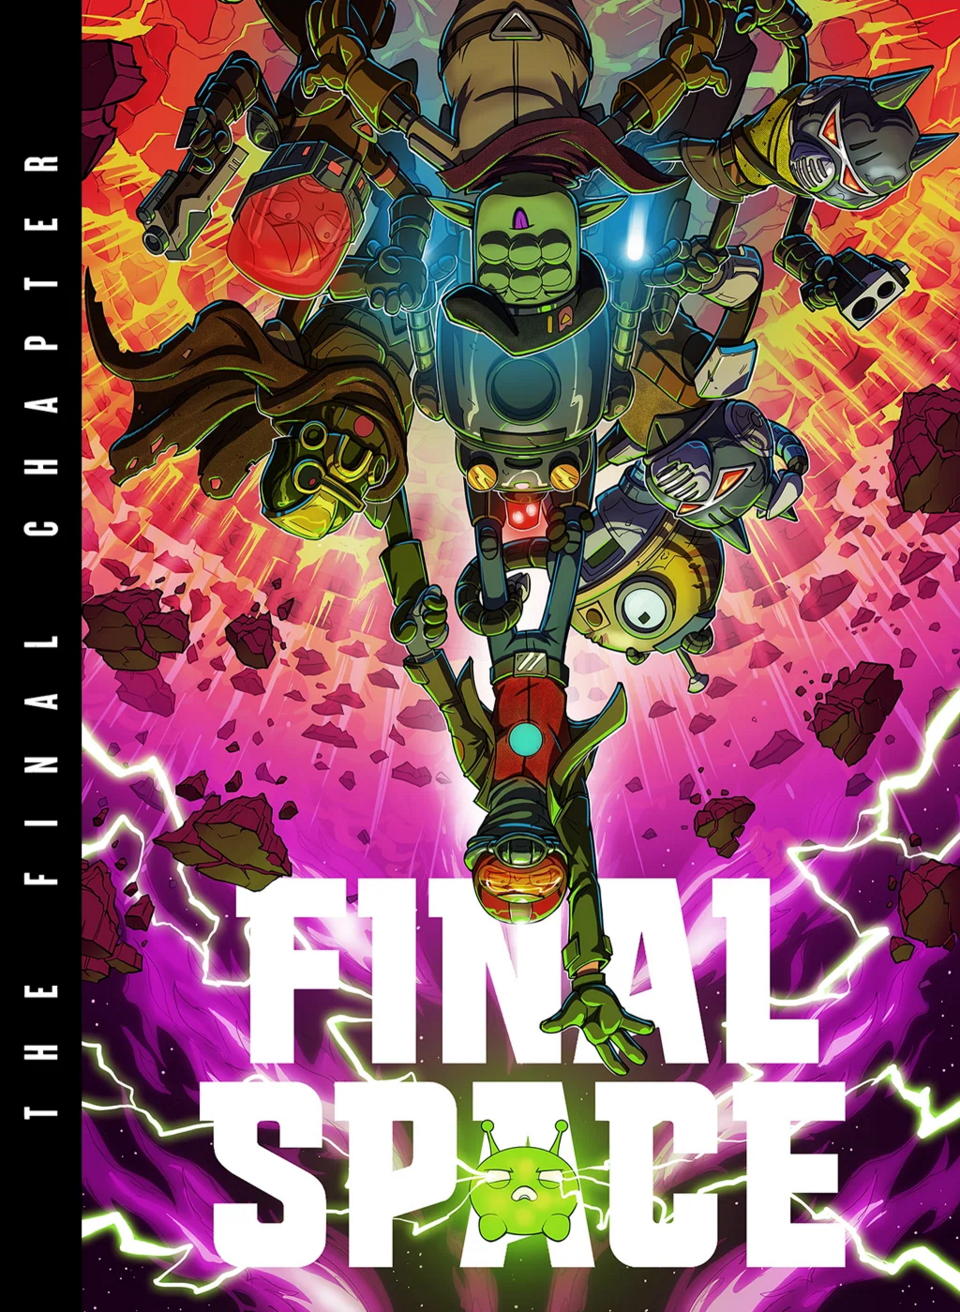 The cover for Final Space: The Final Chapter showing lots of characters from the series.